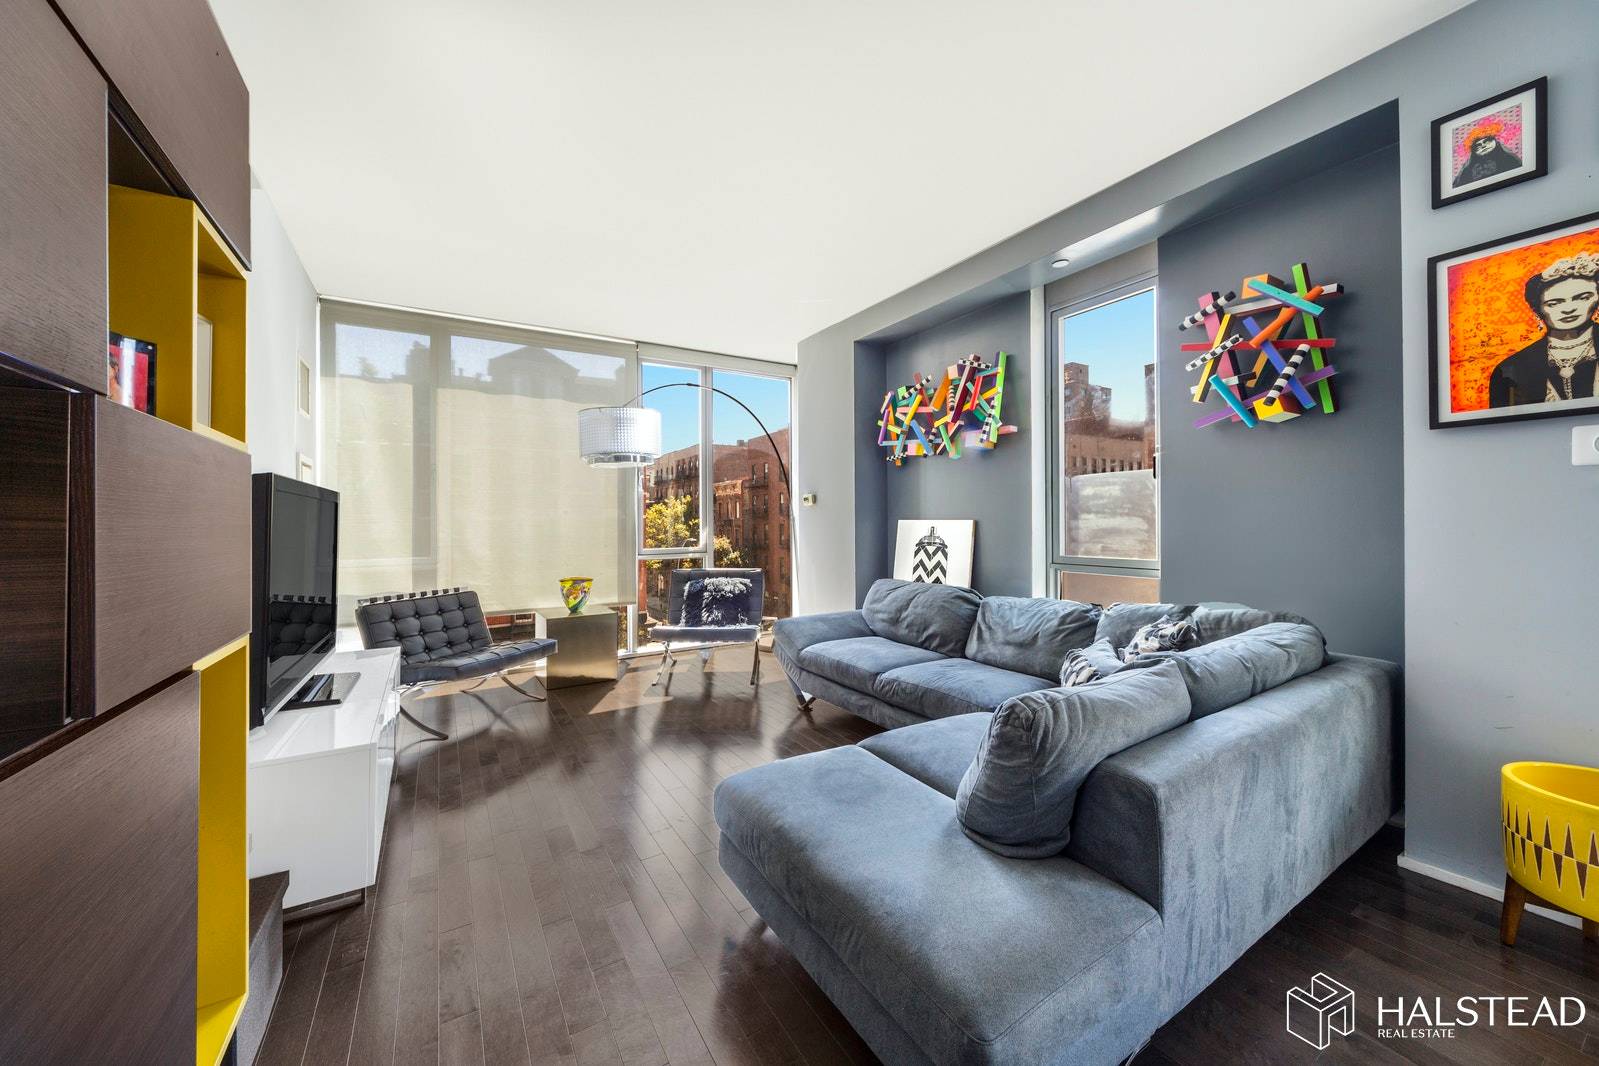 Ideally located between Union Square and the East Village, this contemporary 2 bedroom and 2 bath condo has floor to ceiling windows and amazing light.